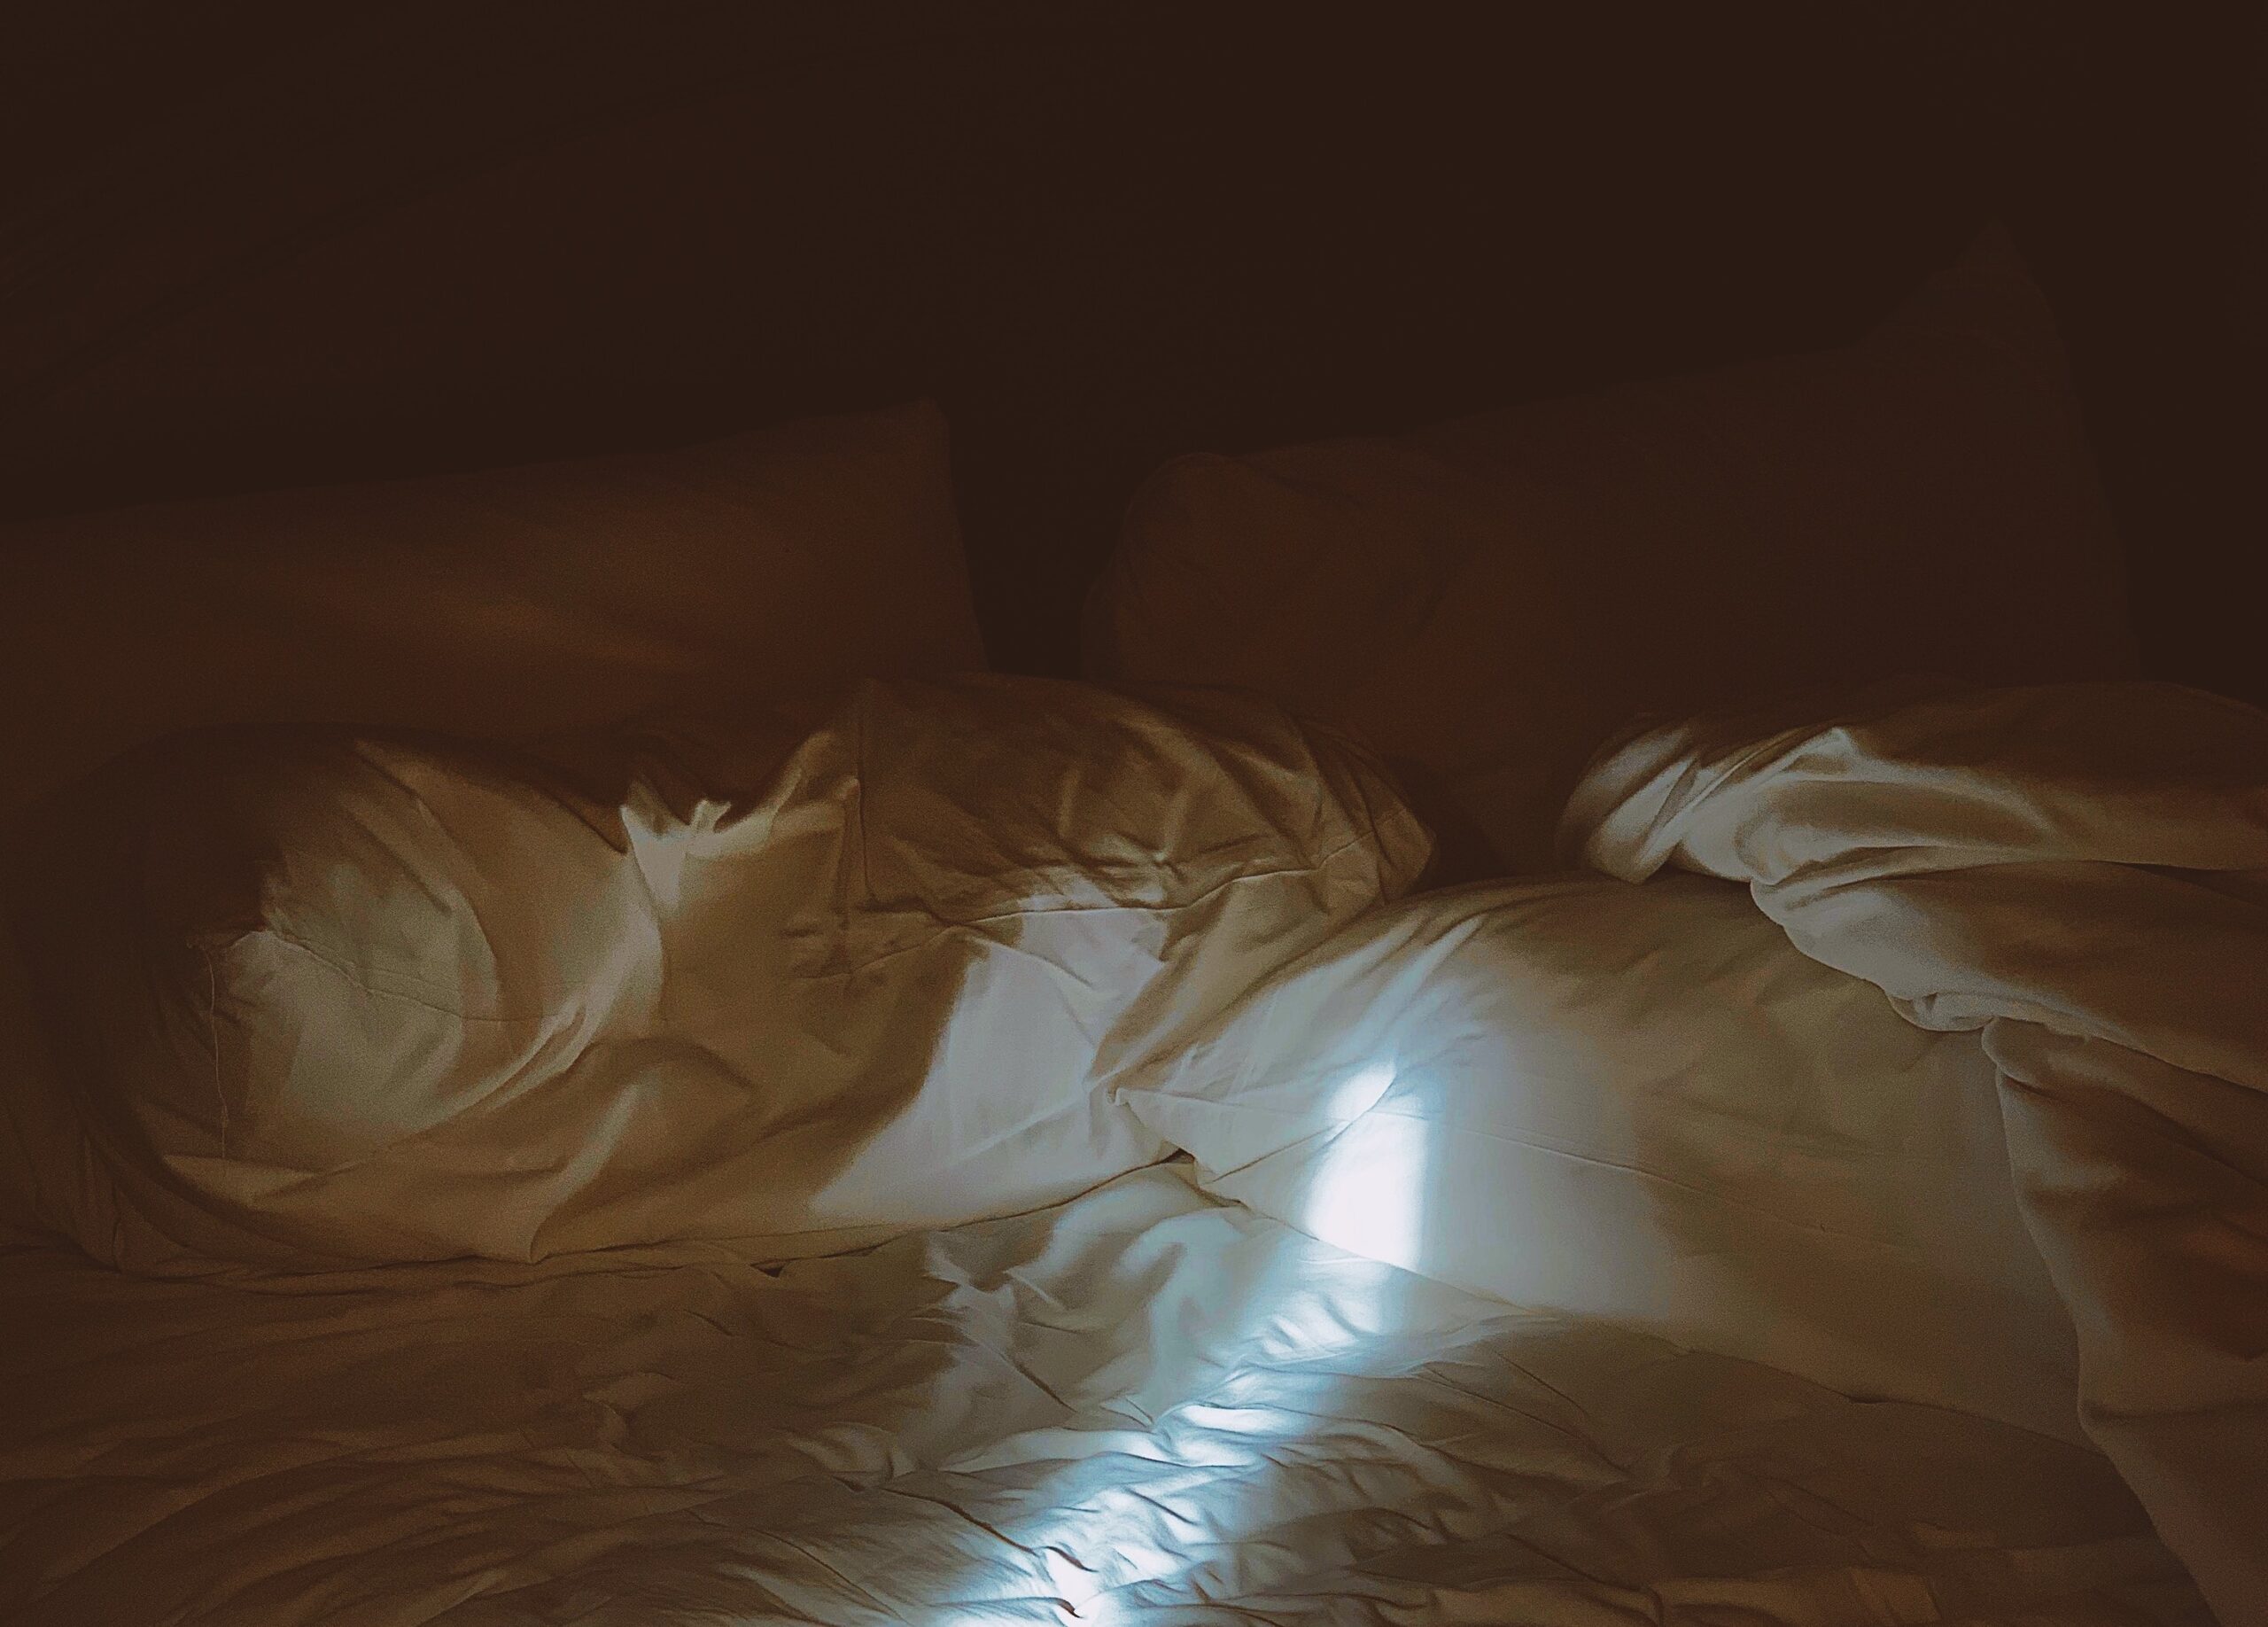 A beam of light falls on an unmade bed in a dark room.